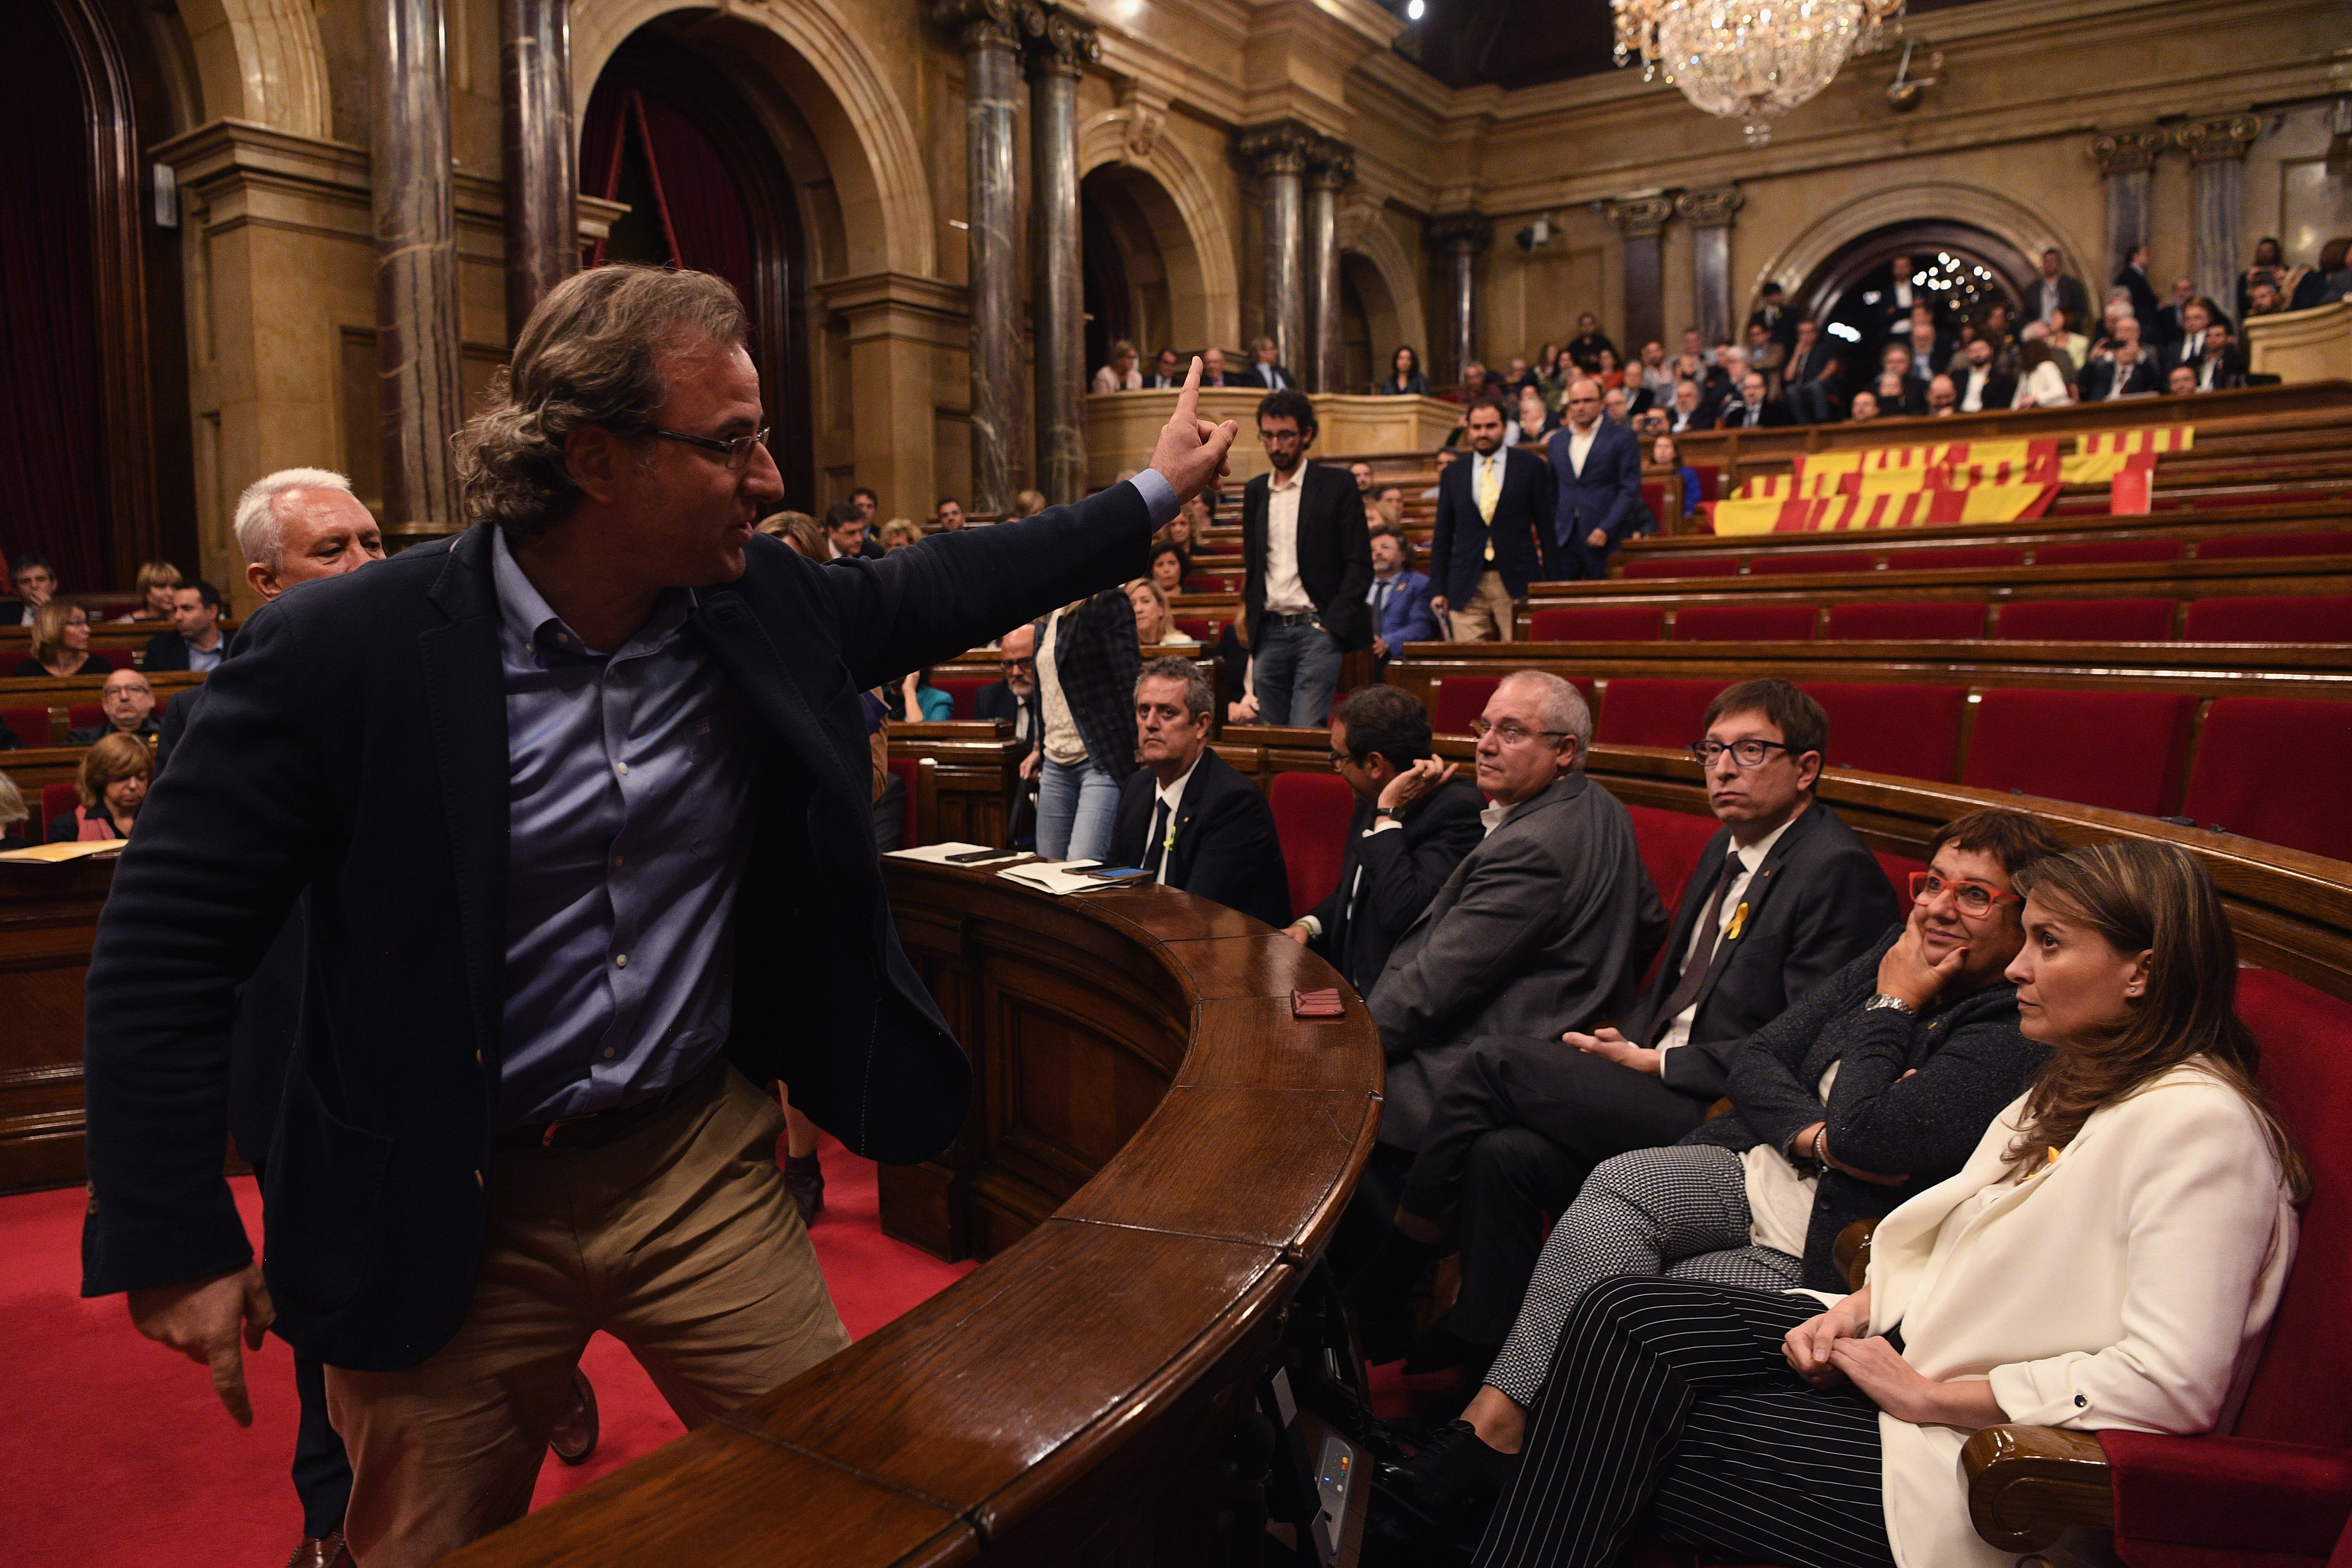 <strong>Members of the People's Party of Catalonia leave the chamber before the vote on independence</strong>